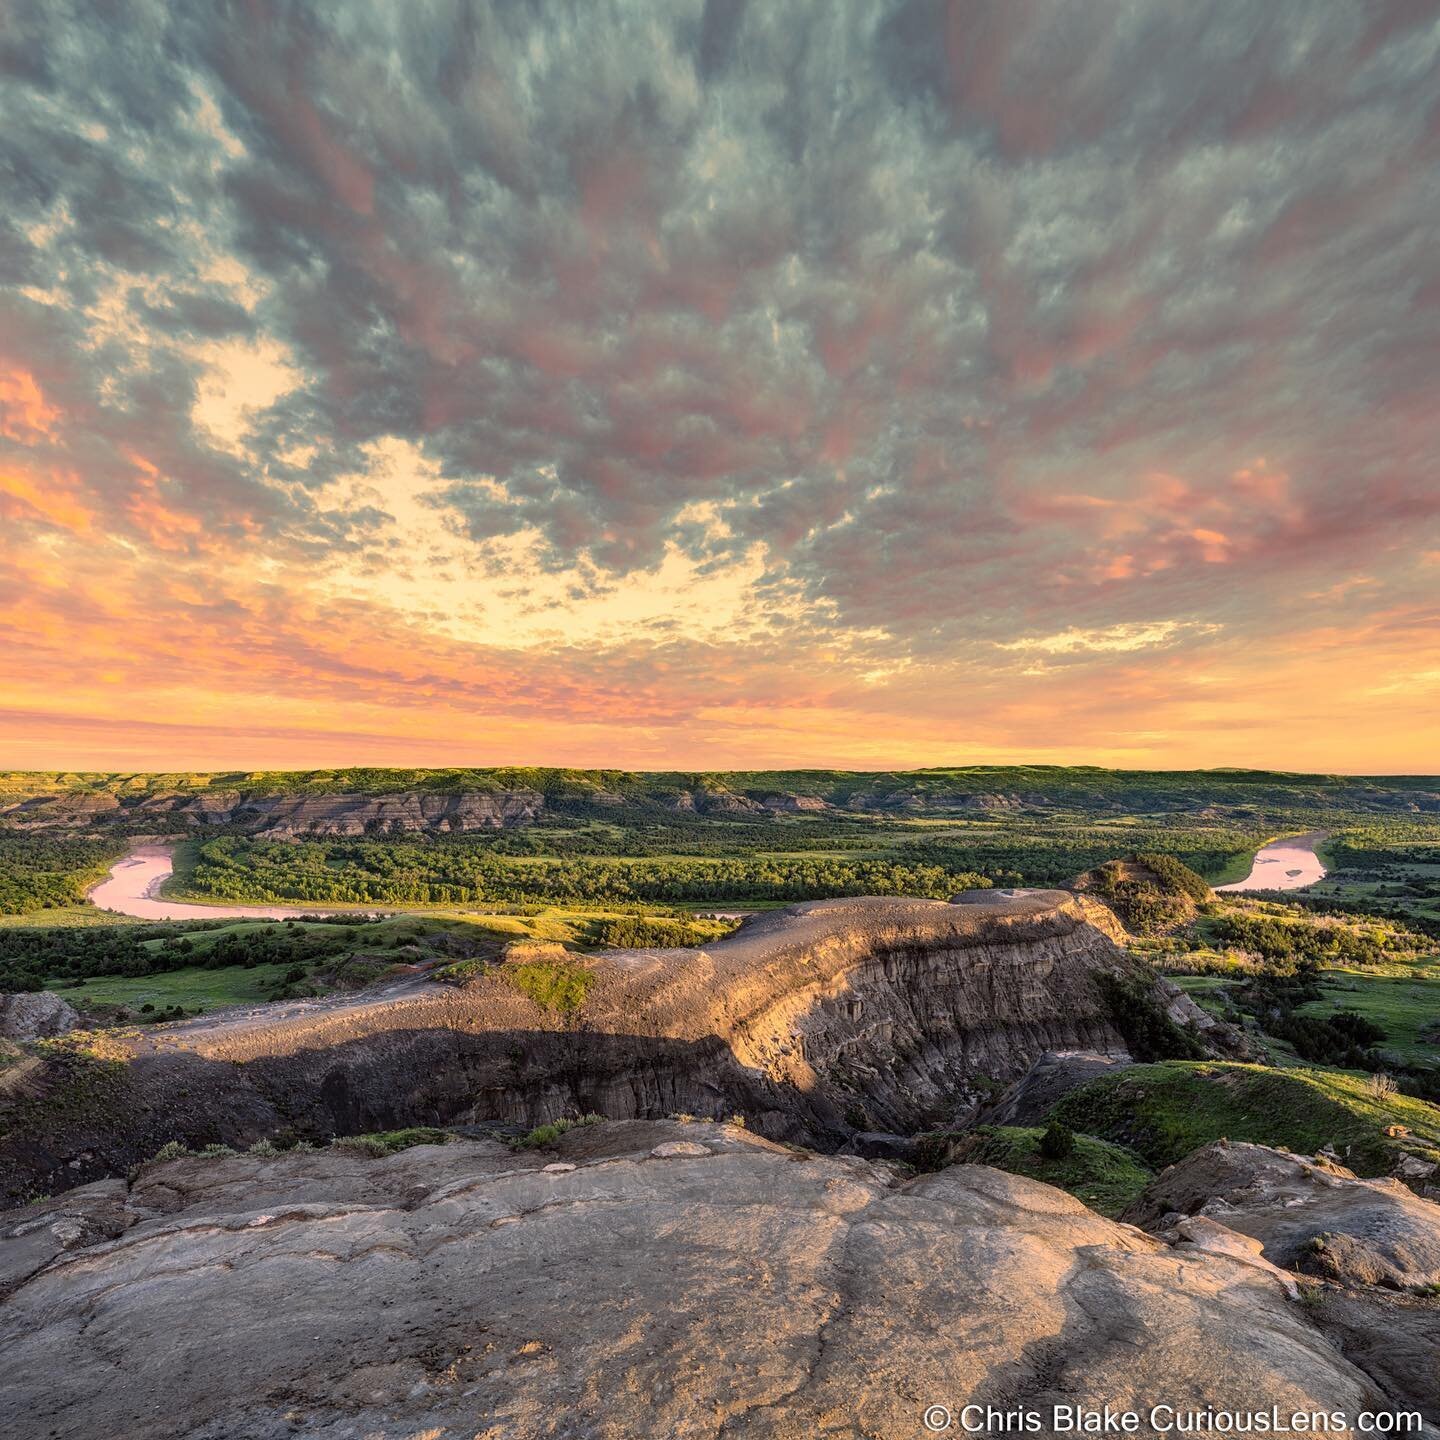 Theodore Roosevelt National Park
Taken a short hike from the Oxbow Bend, there were thunderstorms all afternoon. Fortunately they broke up just prior to sunset.
.
.
Curiouslens.com
.
.
#theodorerooseveltnationalpark #northdakota #sunset #sunsetphotog